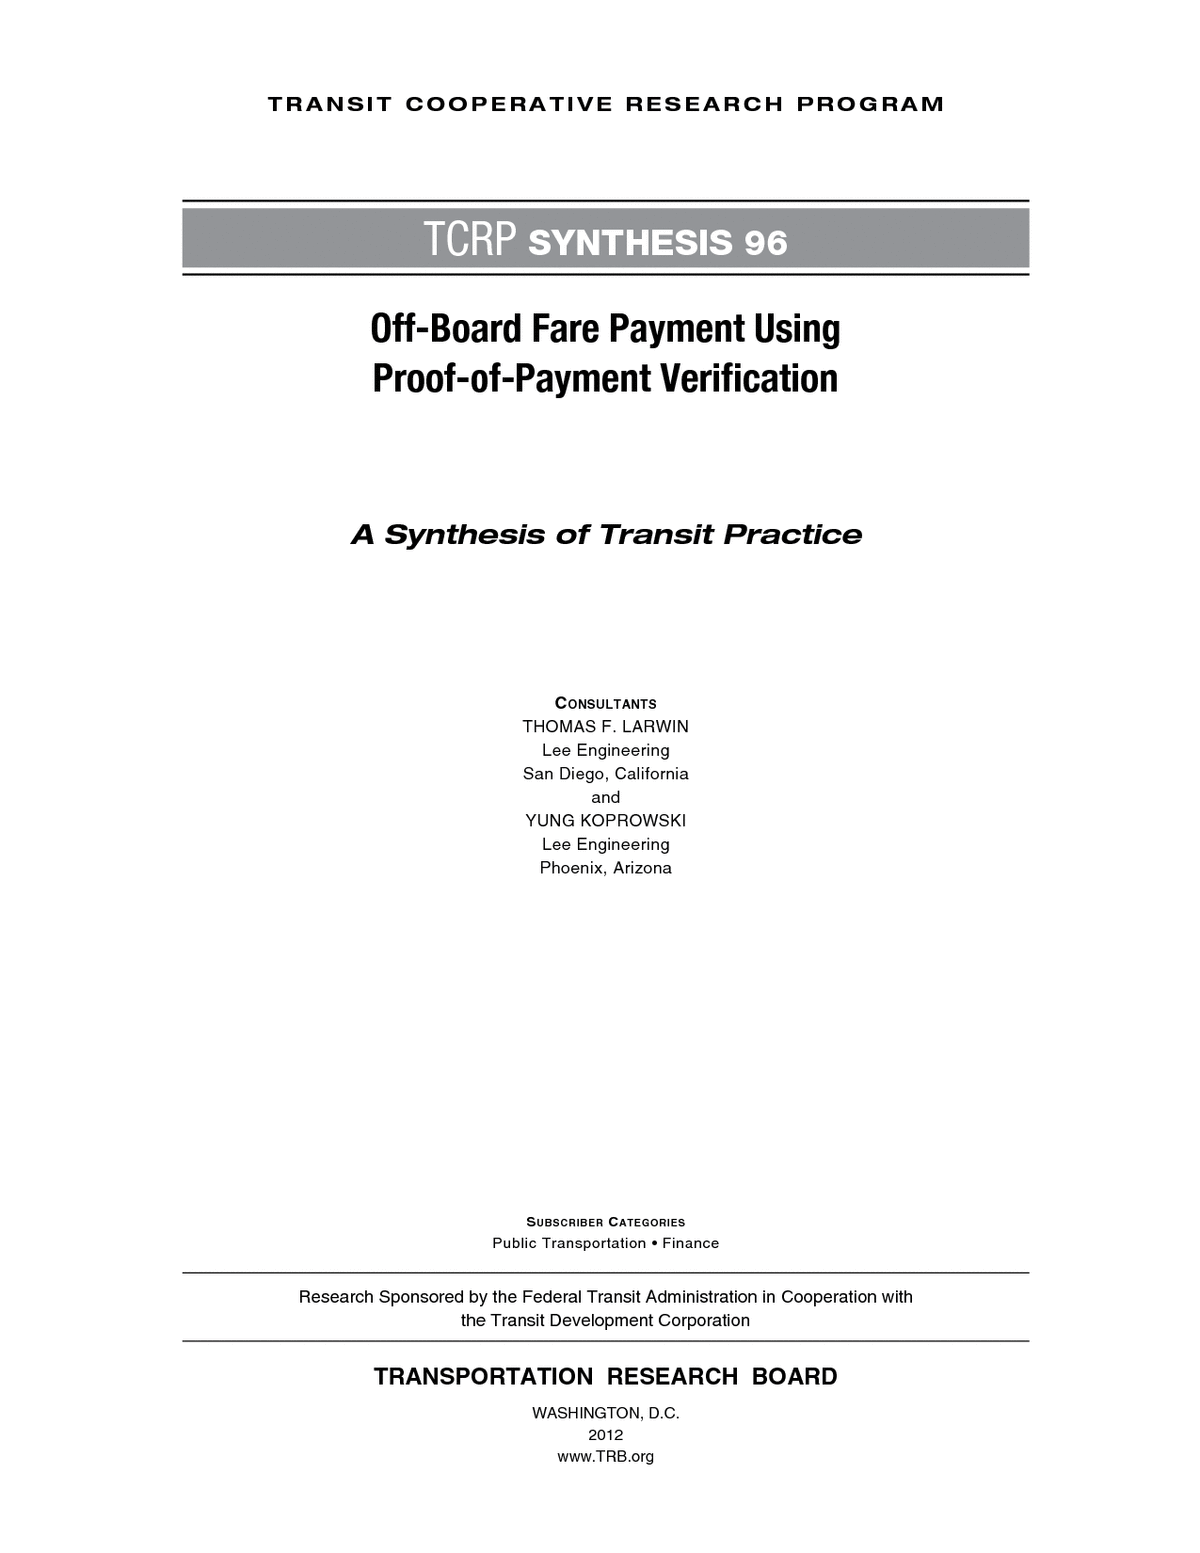 Amber Rose Anal Porn Gif - Summary | Off-Board Fare Payment Using Proof-of-Payment Verification |The  National Academies Press